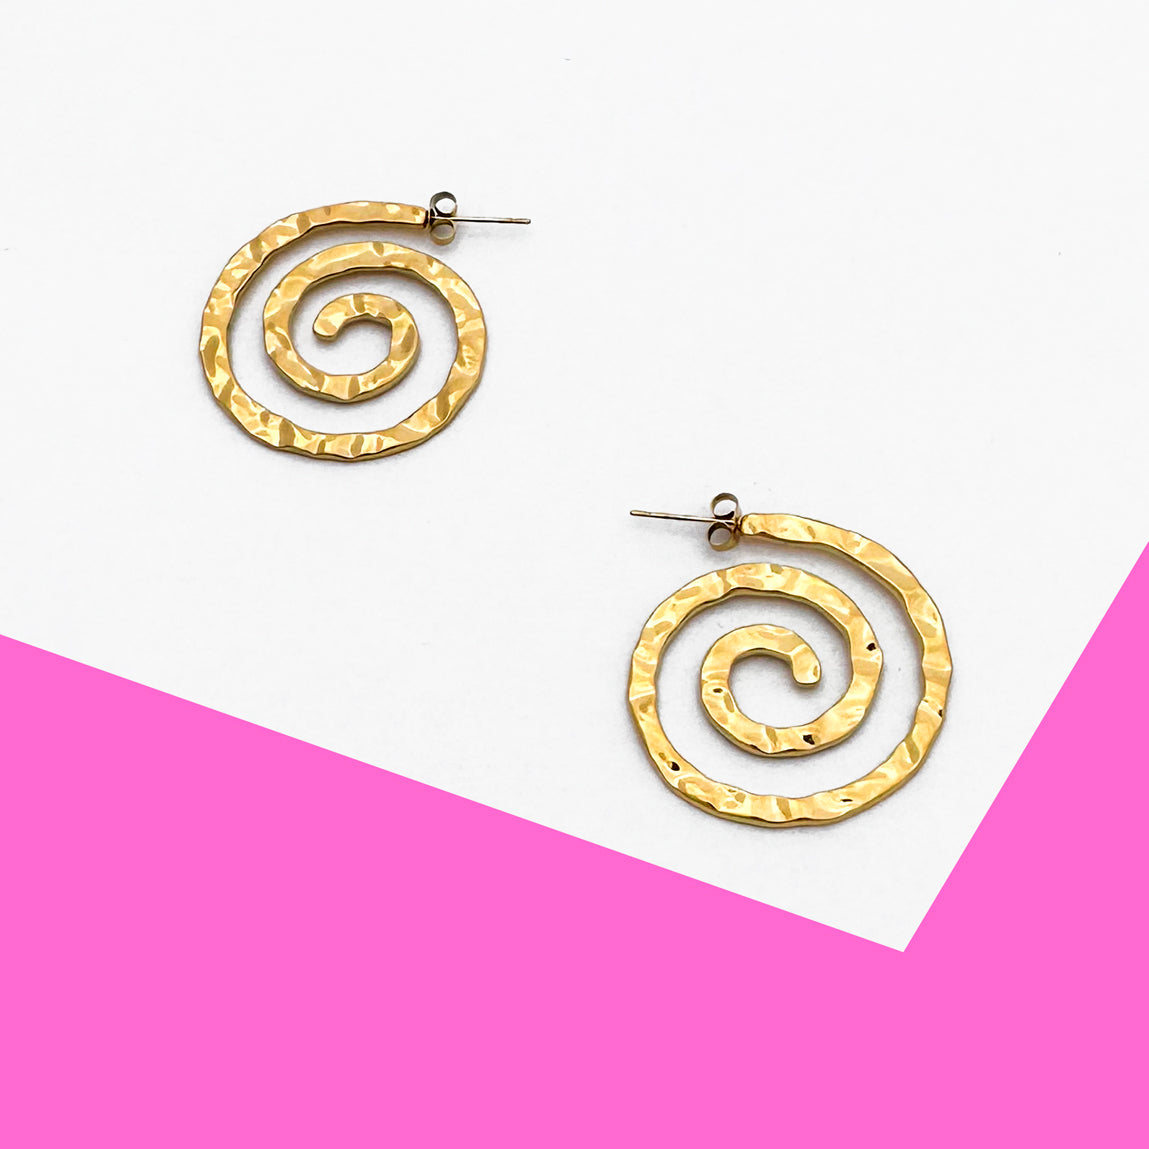 L'AMOUR LIVING Swirl Hammered Earrings - Gold